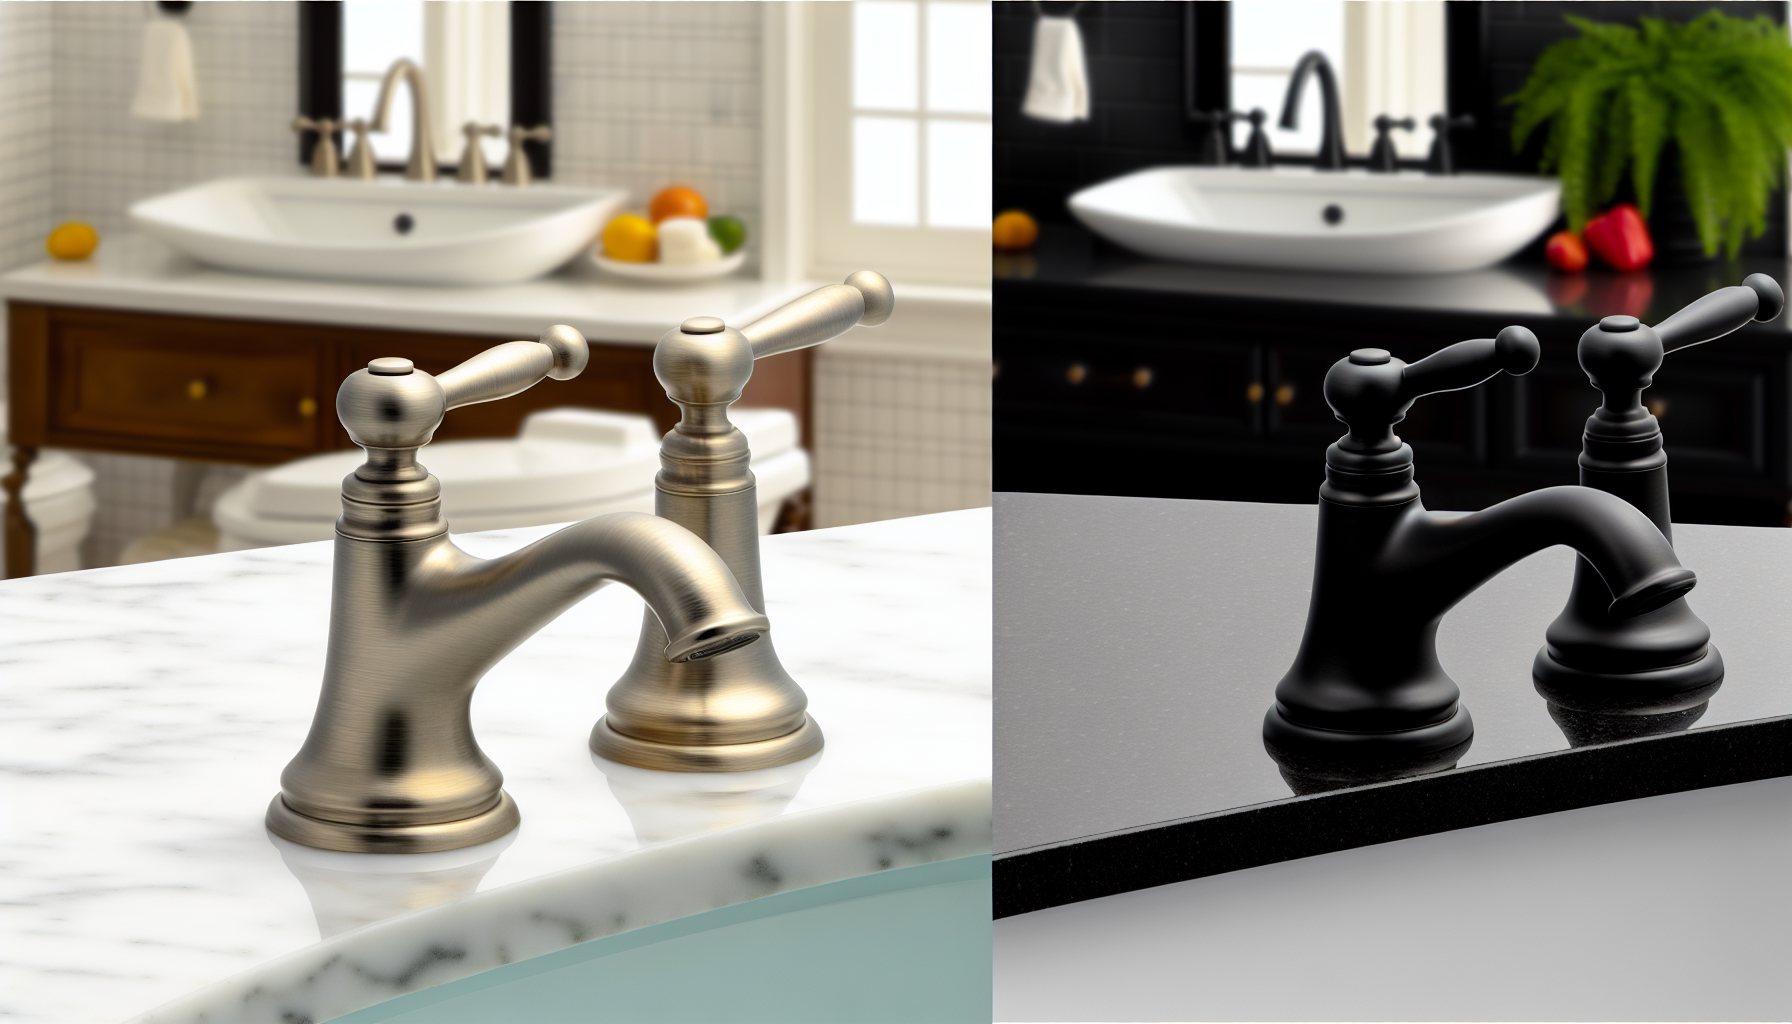 Brushed nickel and matte black tapware known for durability and versatility